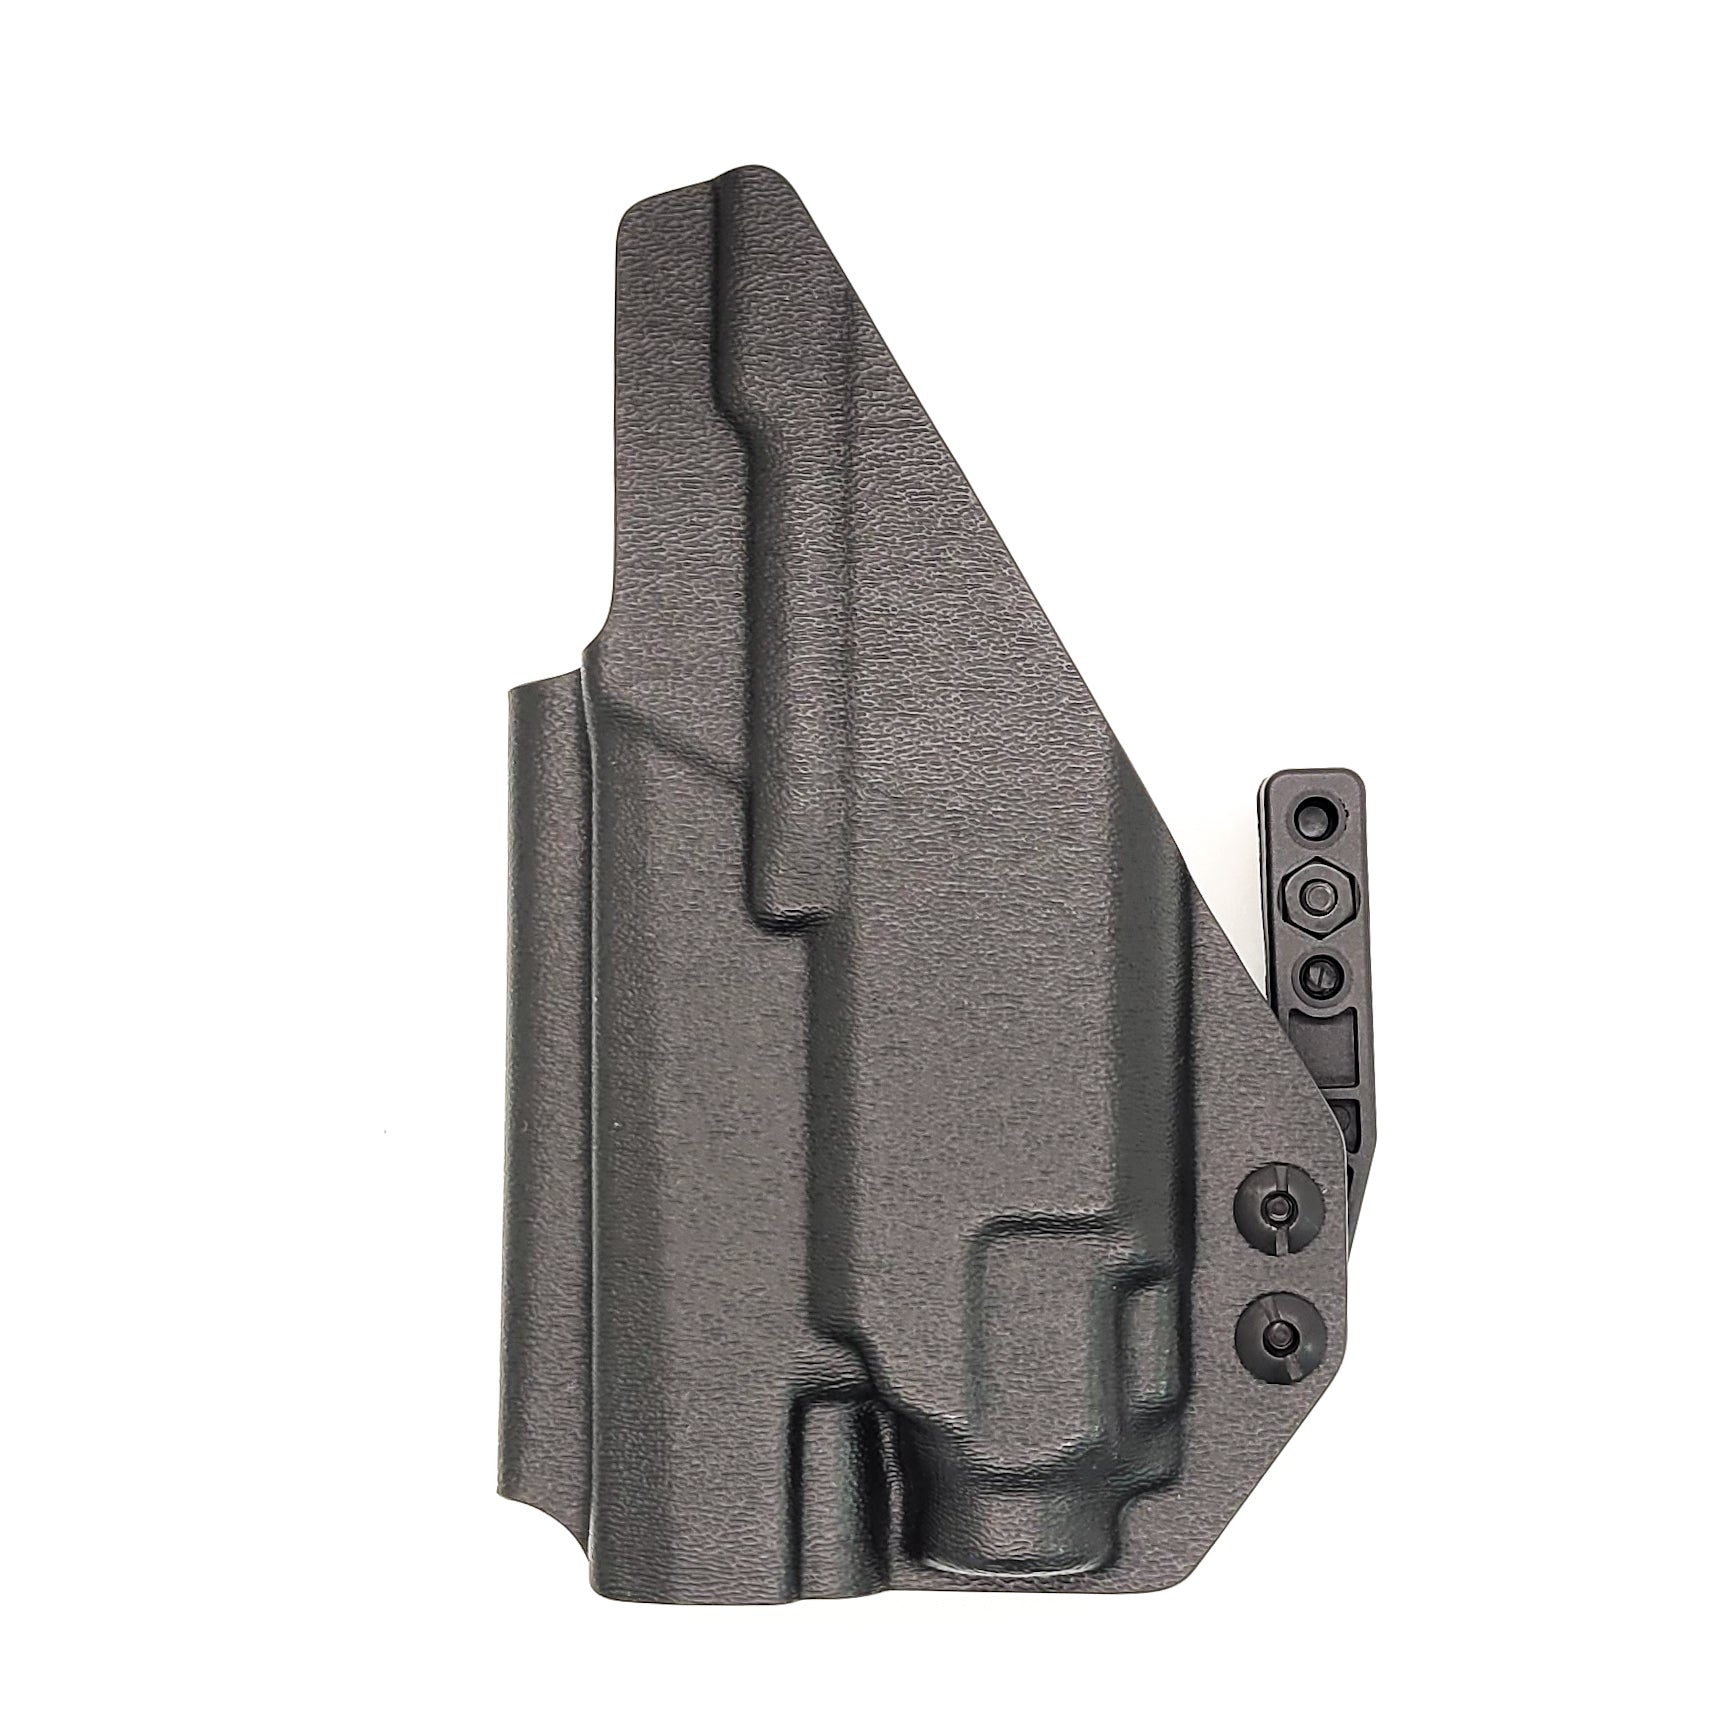 For the best Inside Waistband IWB AIWB Kydex Holster designed to fit the Sig Sauer P365 or P365XL with Streamlight TLR-8 Sub, shop Four Brothers Holsters.  Full sweat guard, adjustable retention, Smooth edges to reduce printing. Made in the USA. Open muzzle for threaded barrels cleared for red dot sights. P 365 XL 